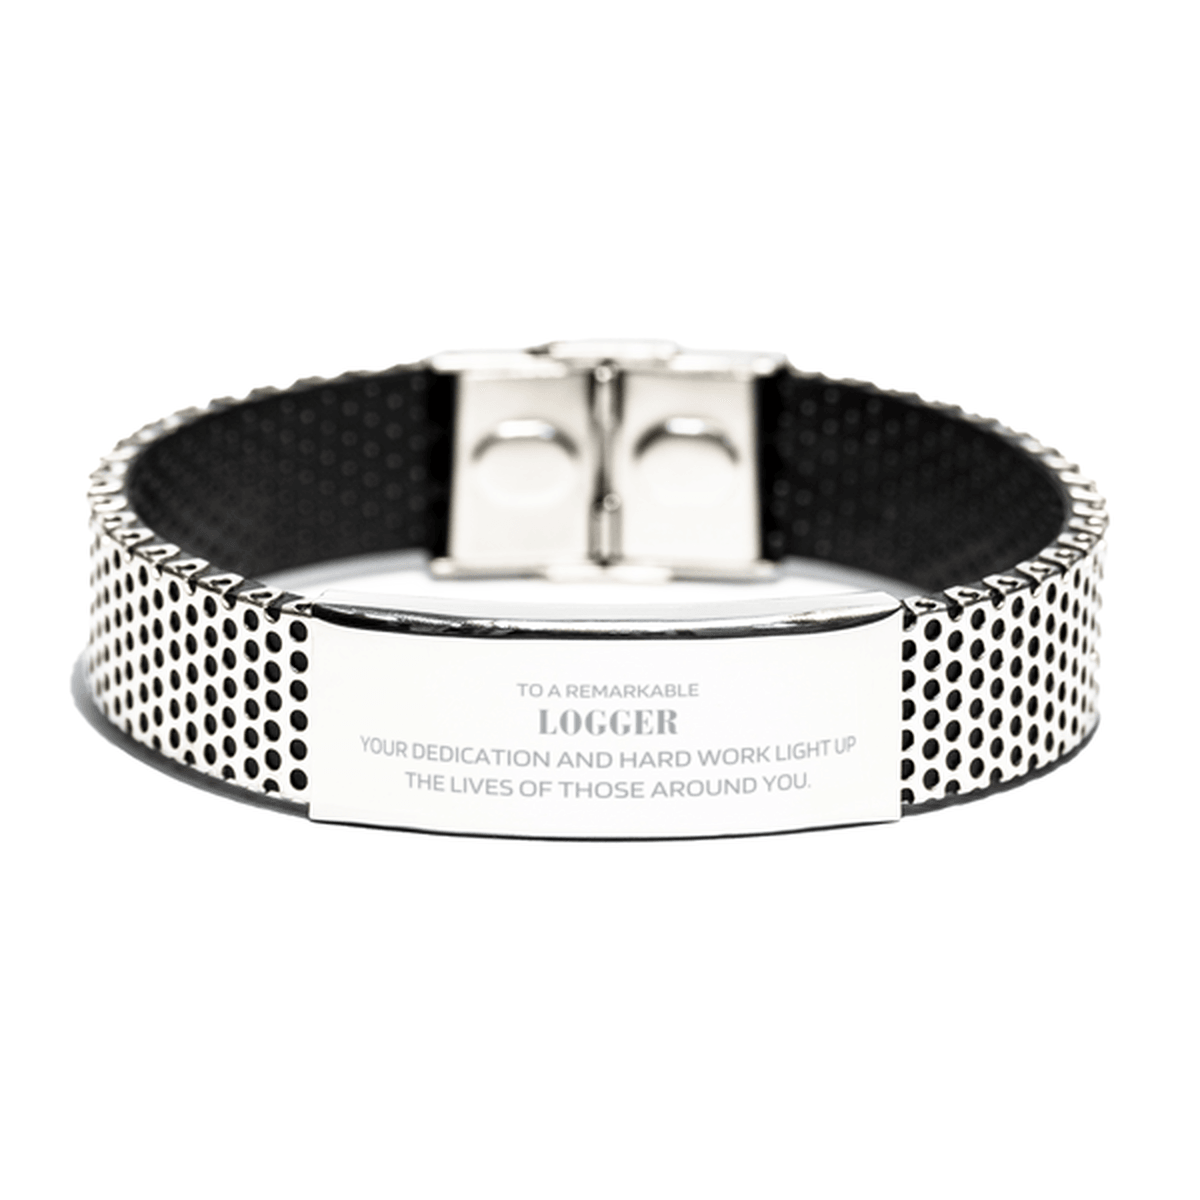 Remarkable Logger Gifts, Your dedication and hard work, Inspirational Birthday Christmas Unique Stainless Steel Bracelet For Logger, Coworkers, Men, Women, Friends - Mallard Moon Gift Shop